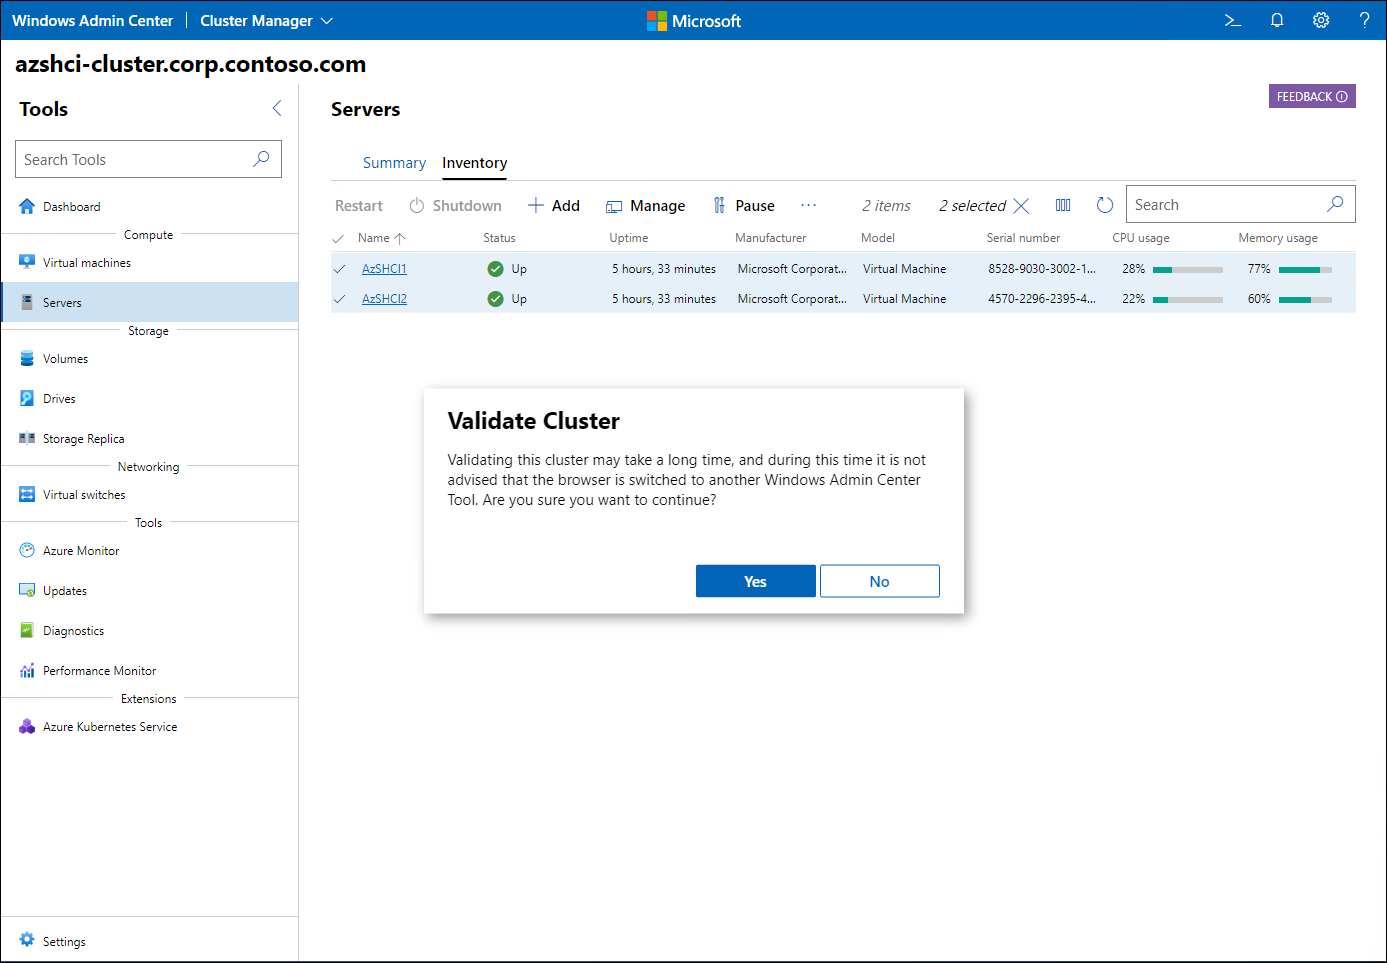 The screenshot depicts the cluster validation option available from the Cluster Manager interface in Windows Admin Center.